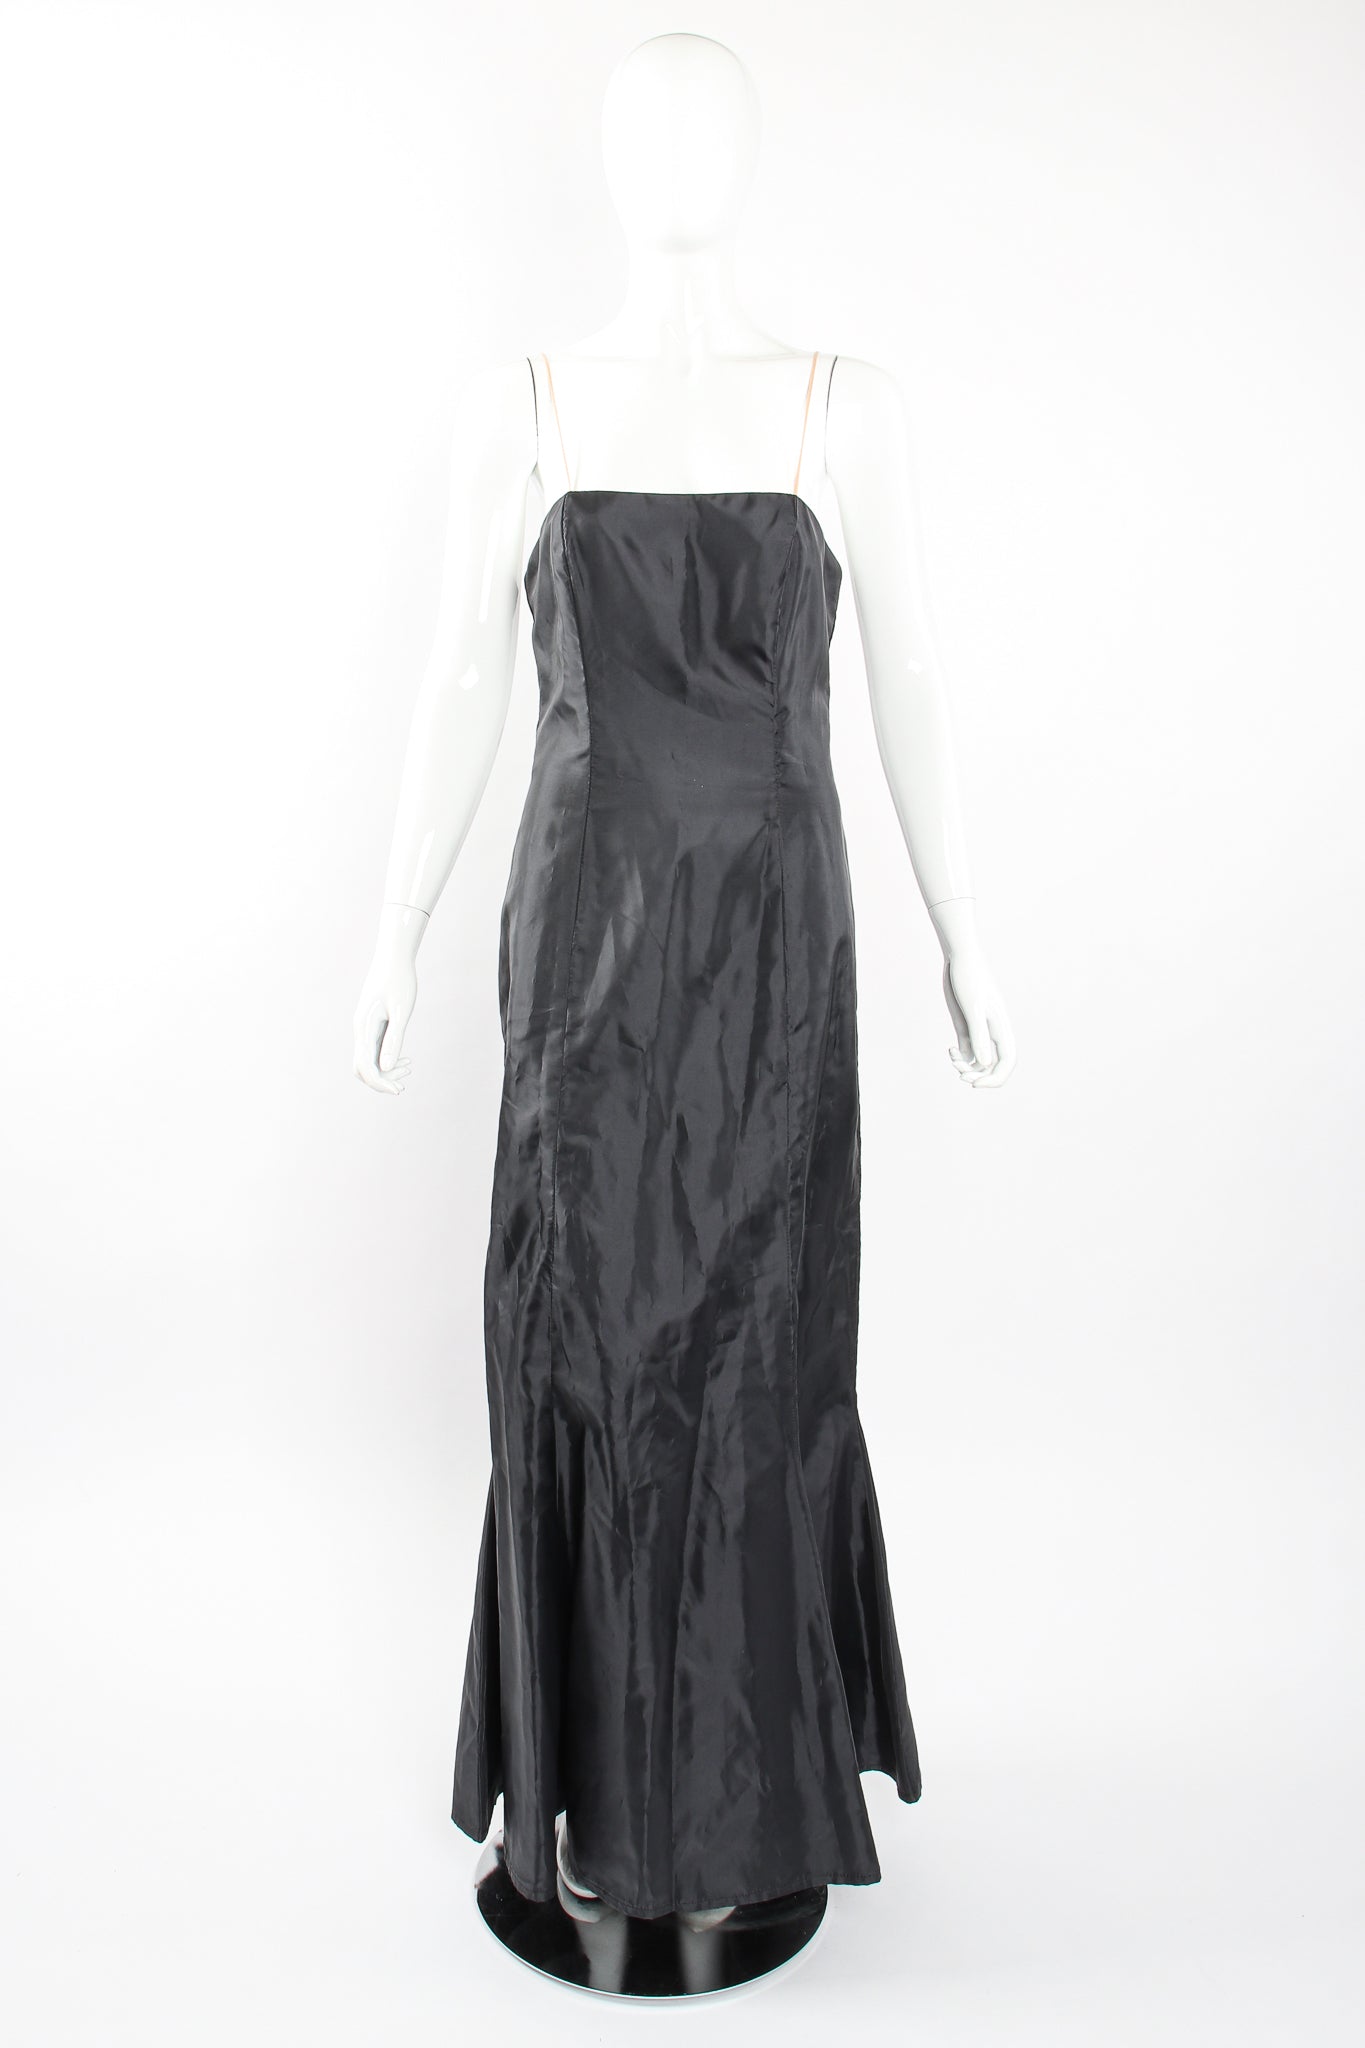 Vintage Victor Costa Sheer Brocade Layered Mermaid Gown slip front on Mannequin at Recess Los Angeles